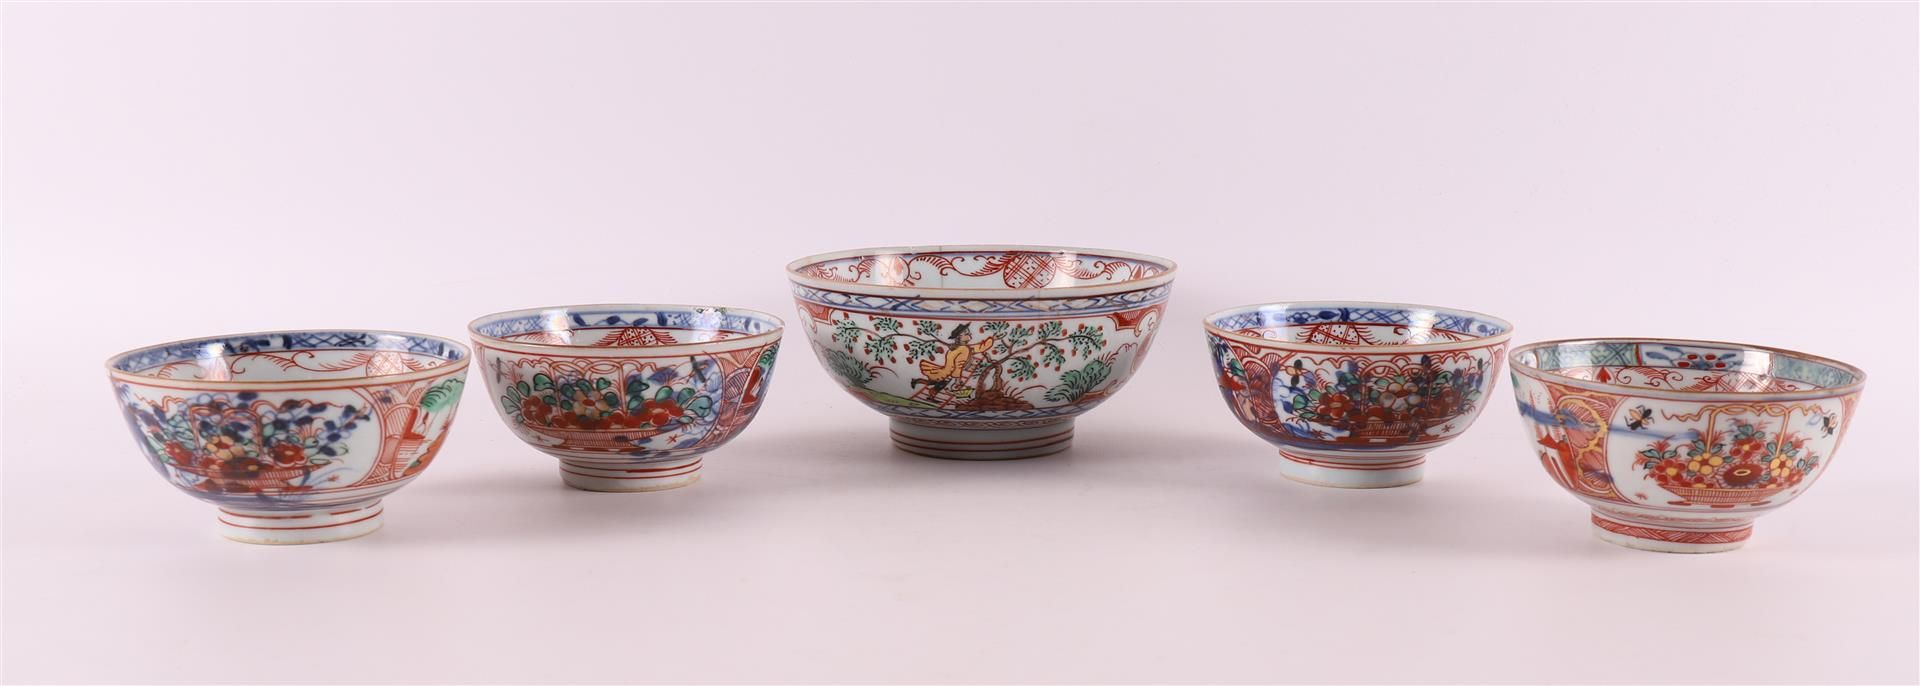 Null Five various porcelain Amsterdam variegated bowls, China, 18th century.